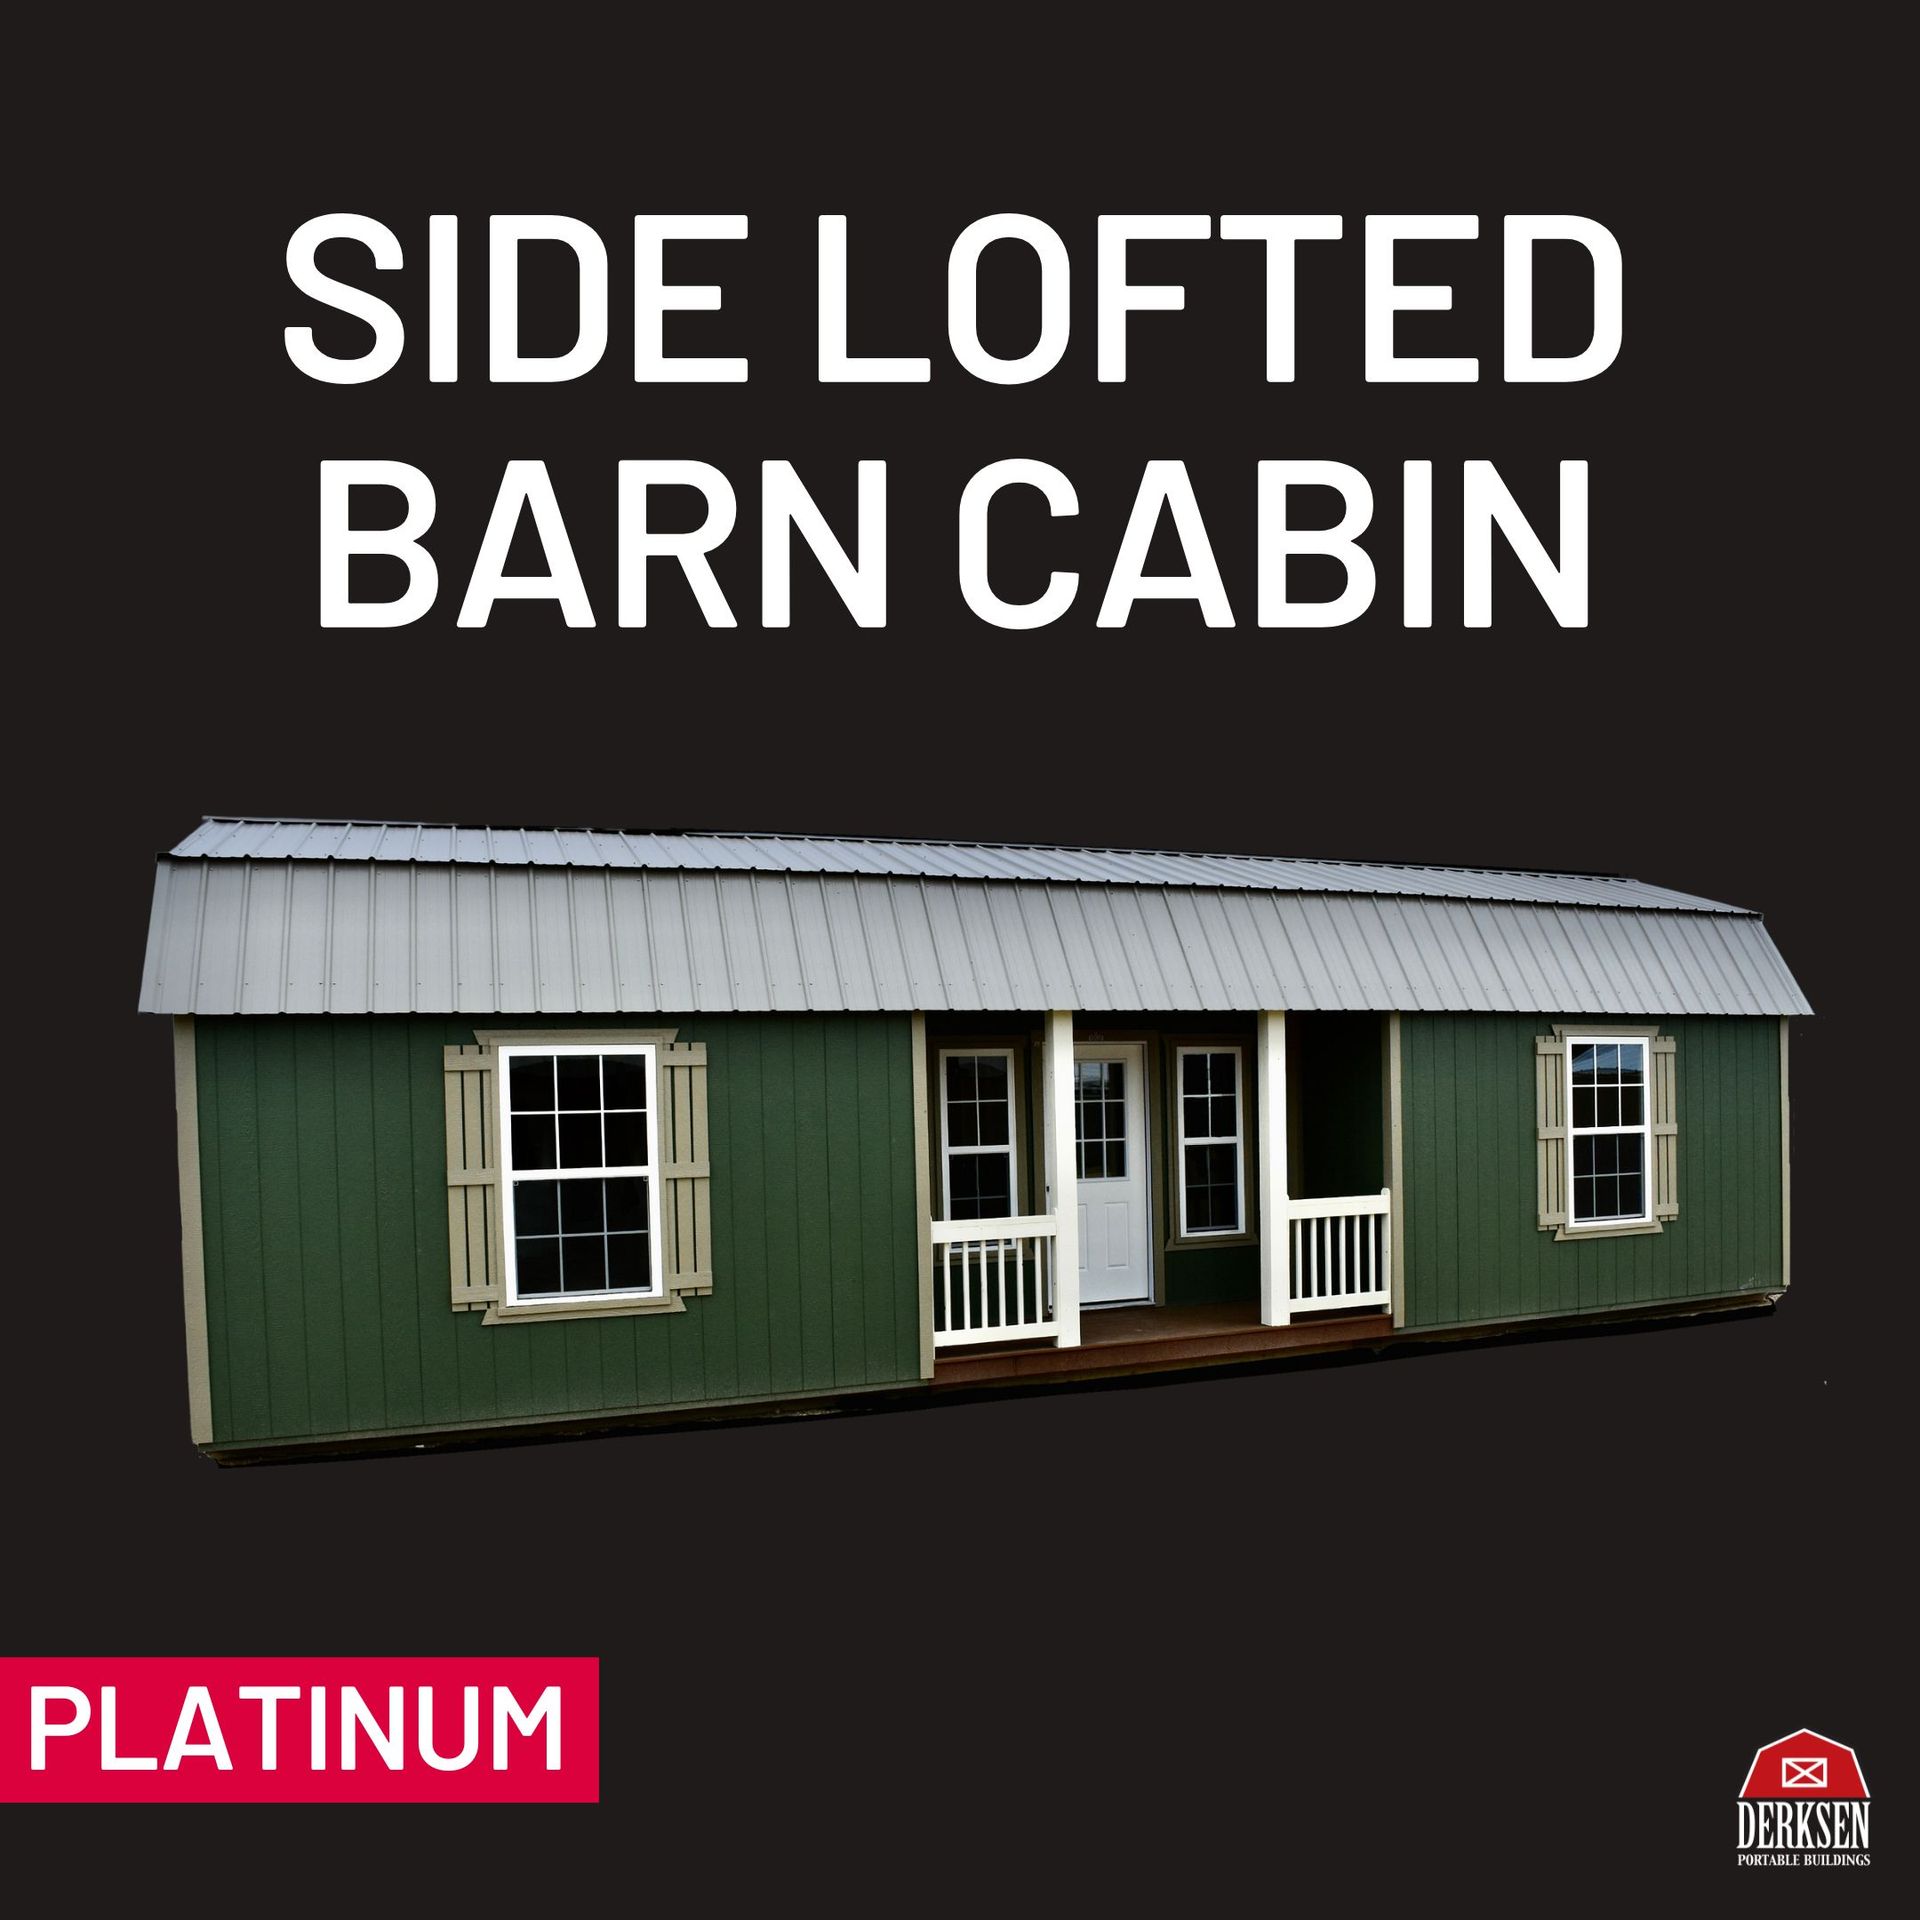 a picture of a side lofted barn cabin platinum